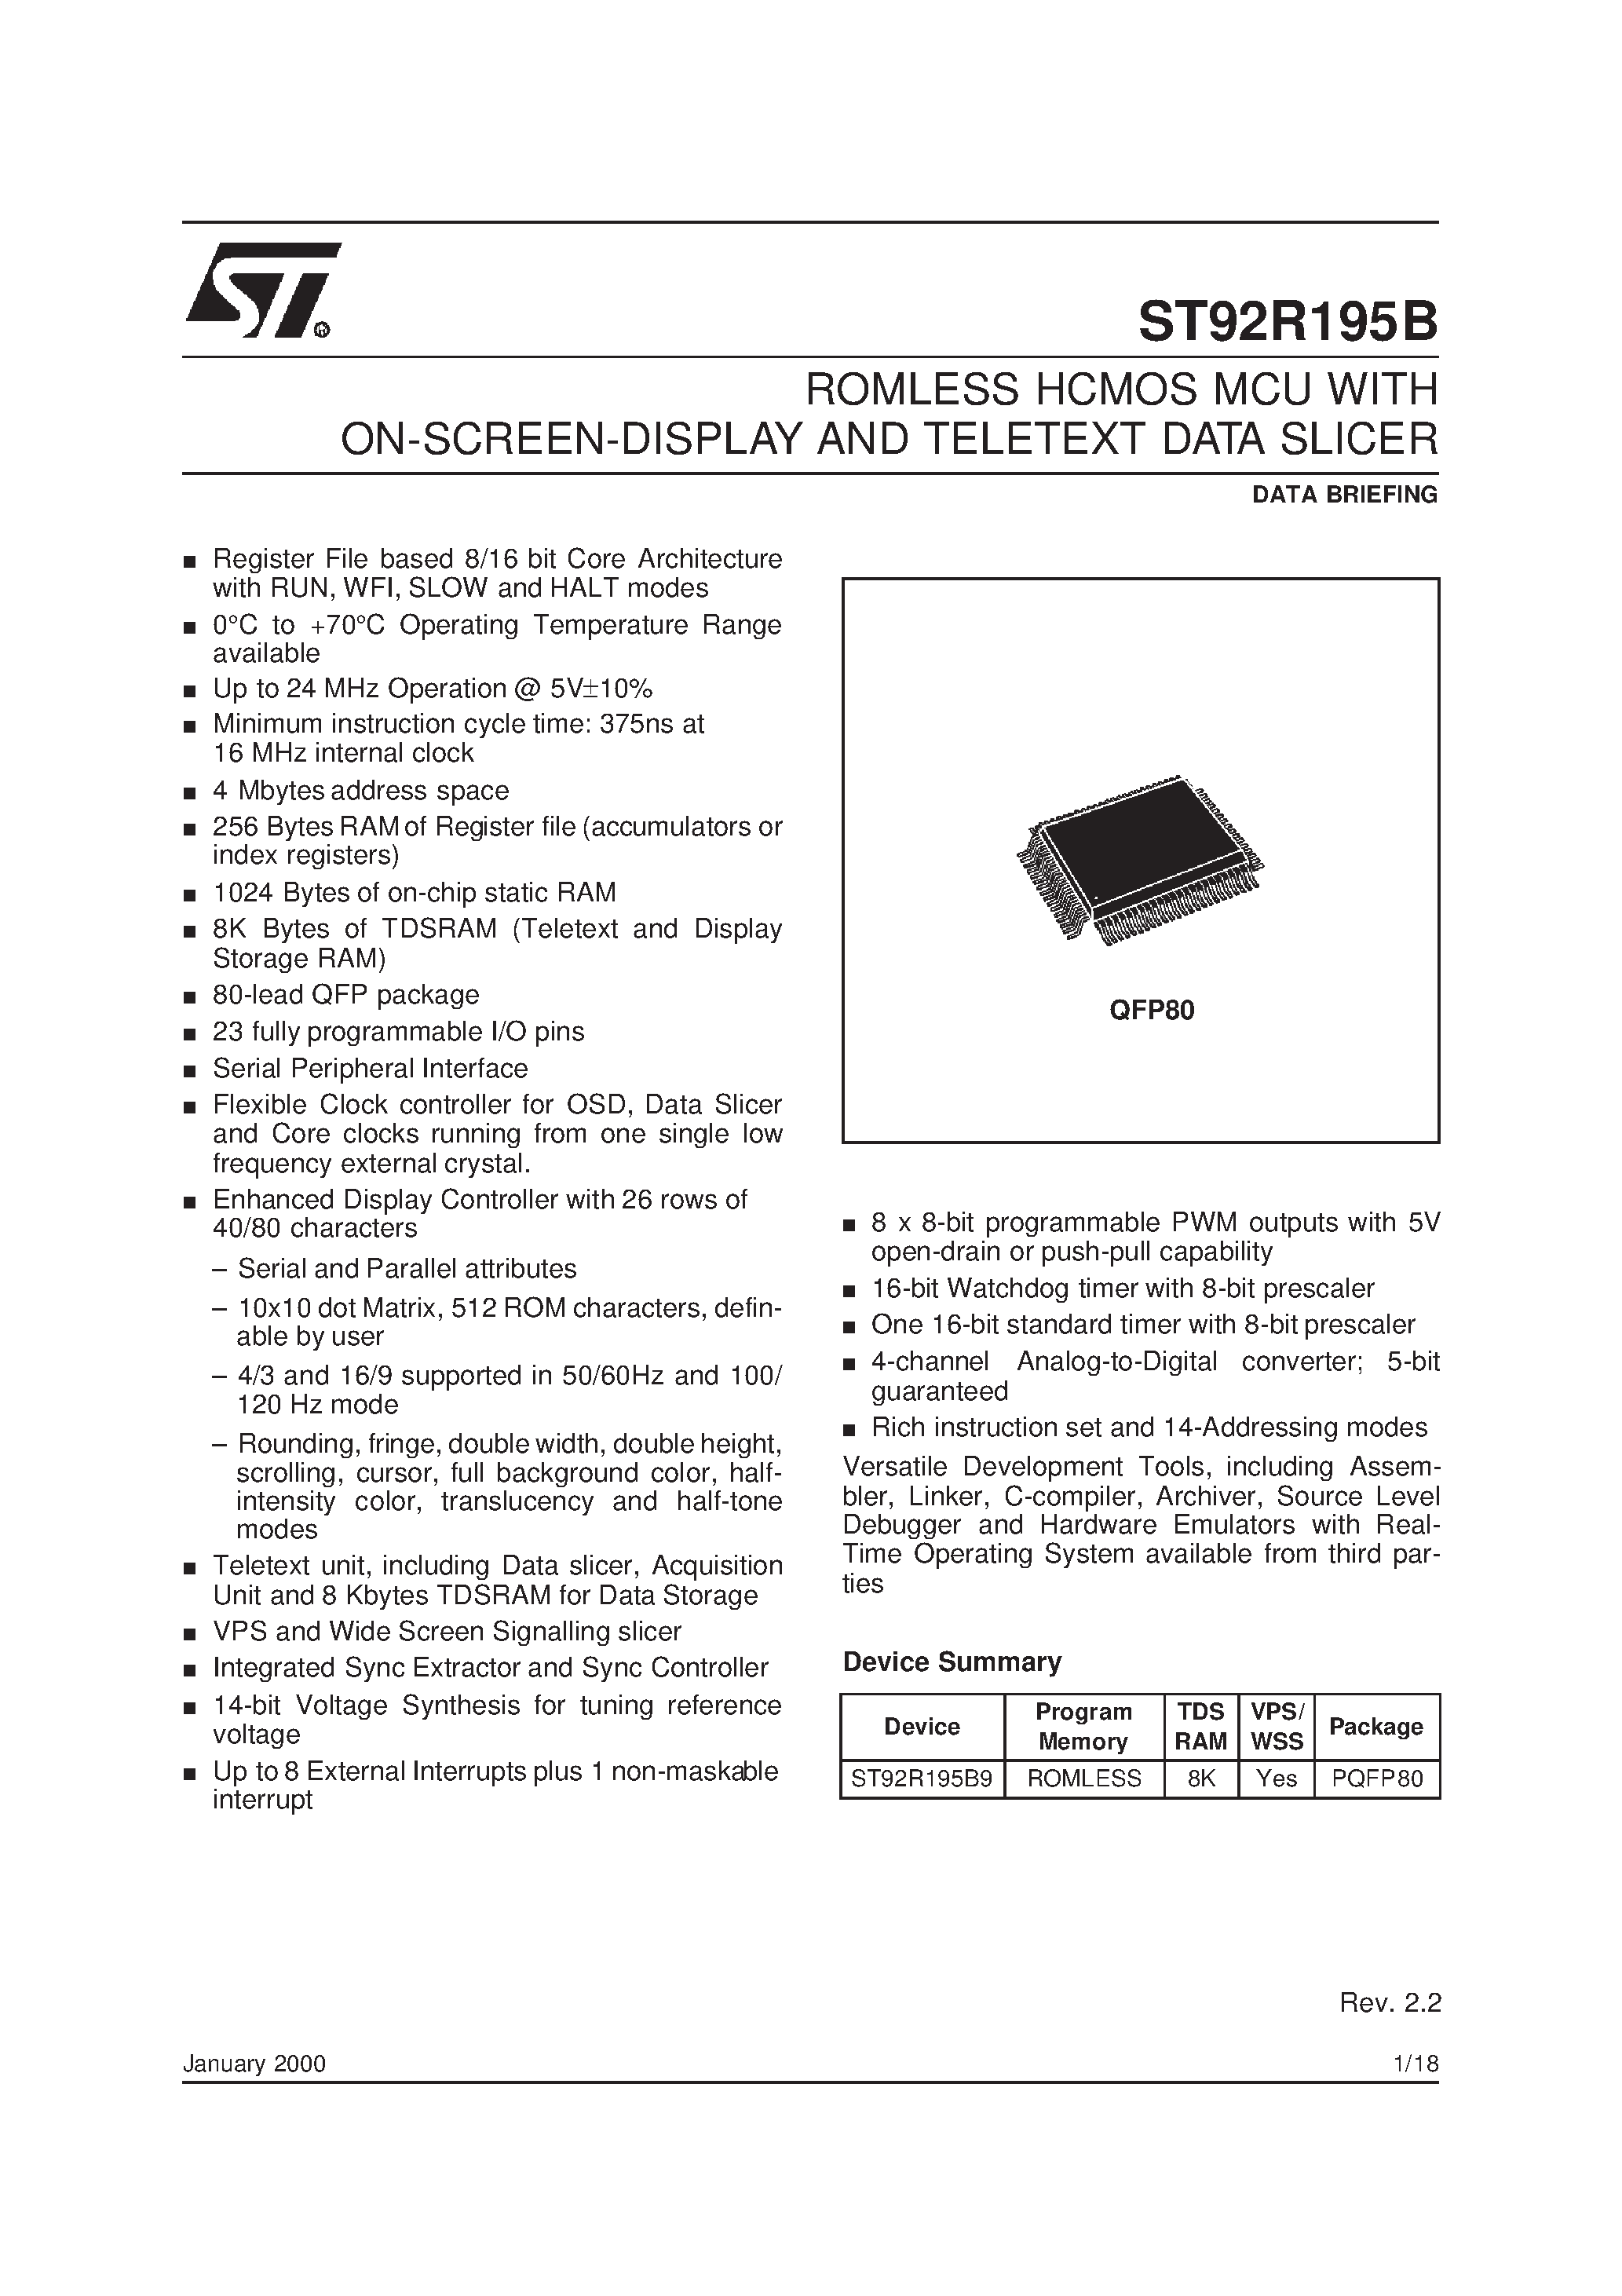 Datasheet ST92R195B - ROMLESS HCMOS MCU WITH ON-SCREEN-DISPLAY AND TELETEXT DATA SLICER page 1